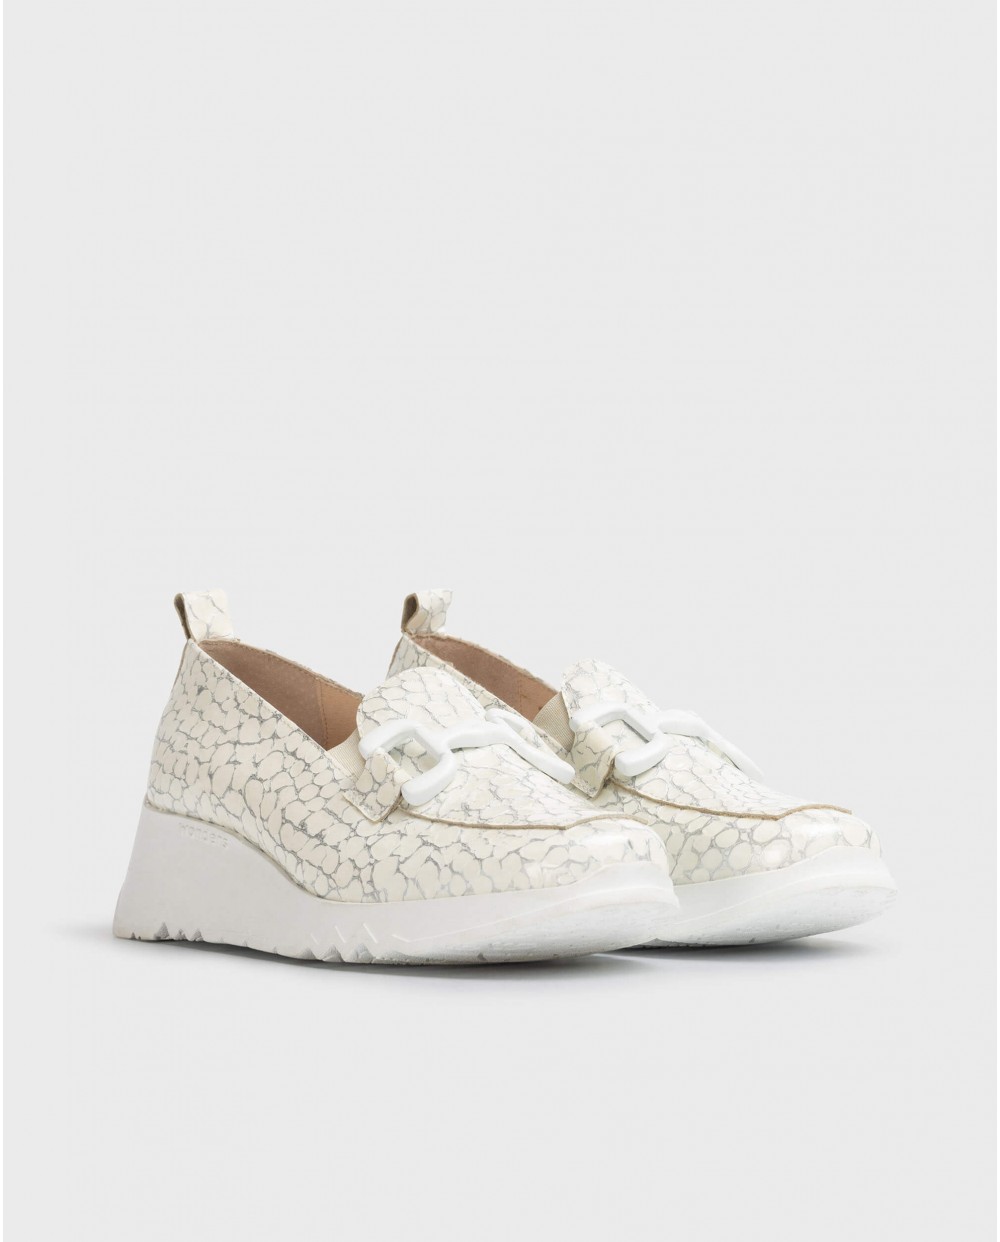 Wonders-Loafers-White Social Moccasin